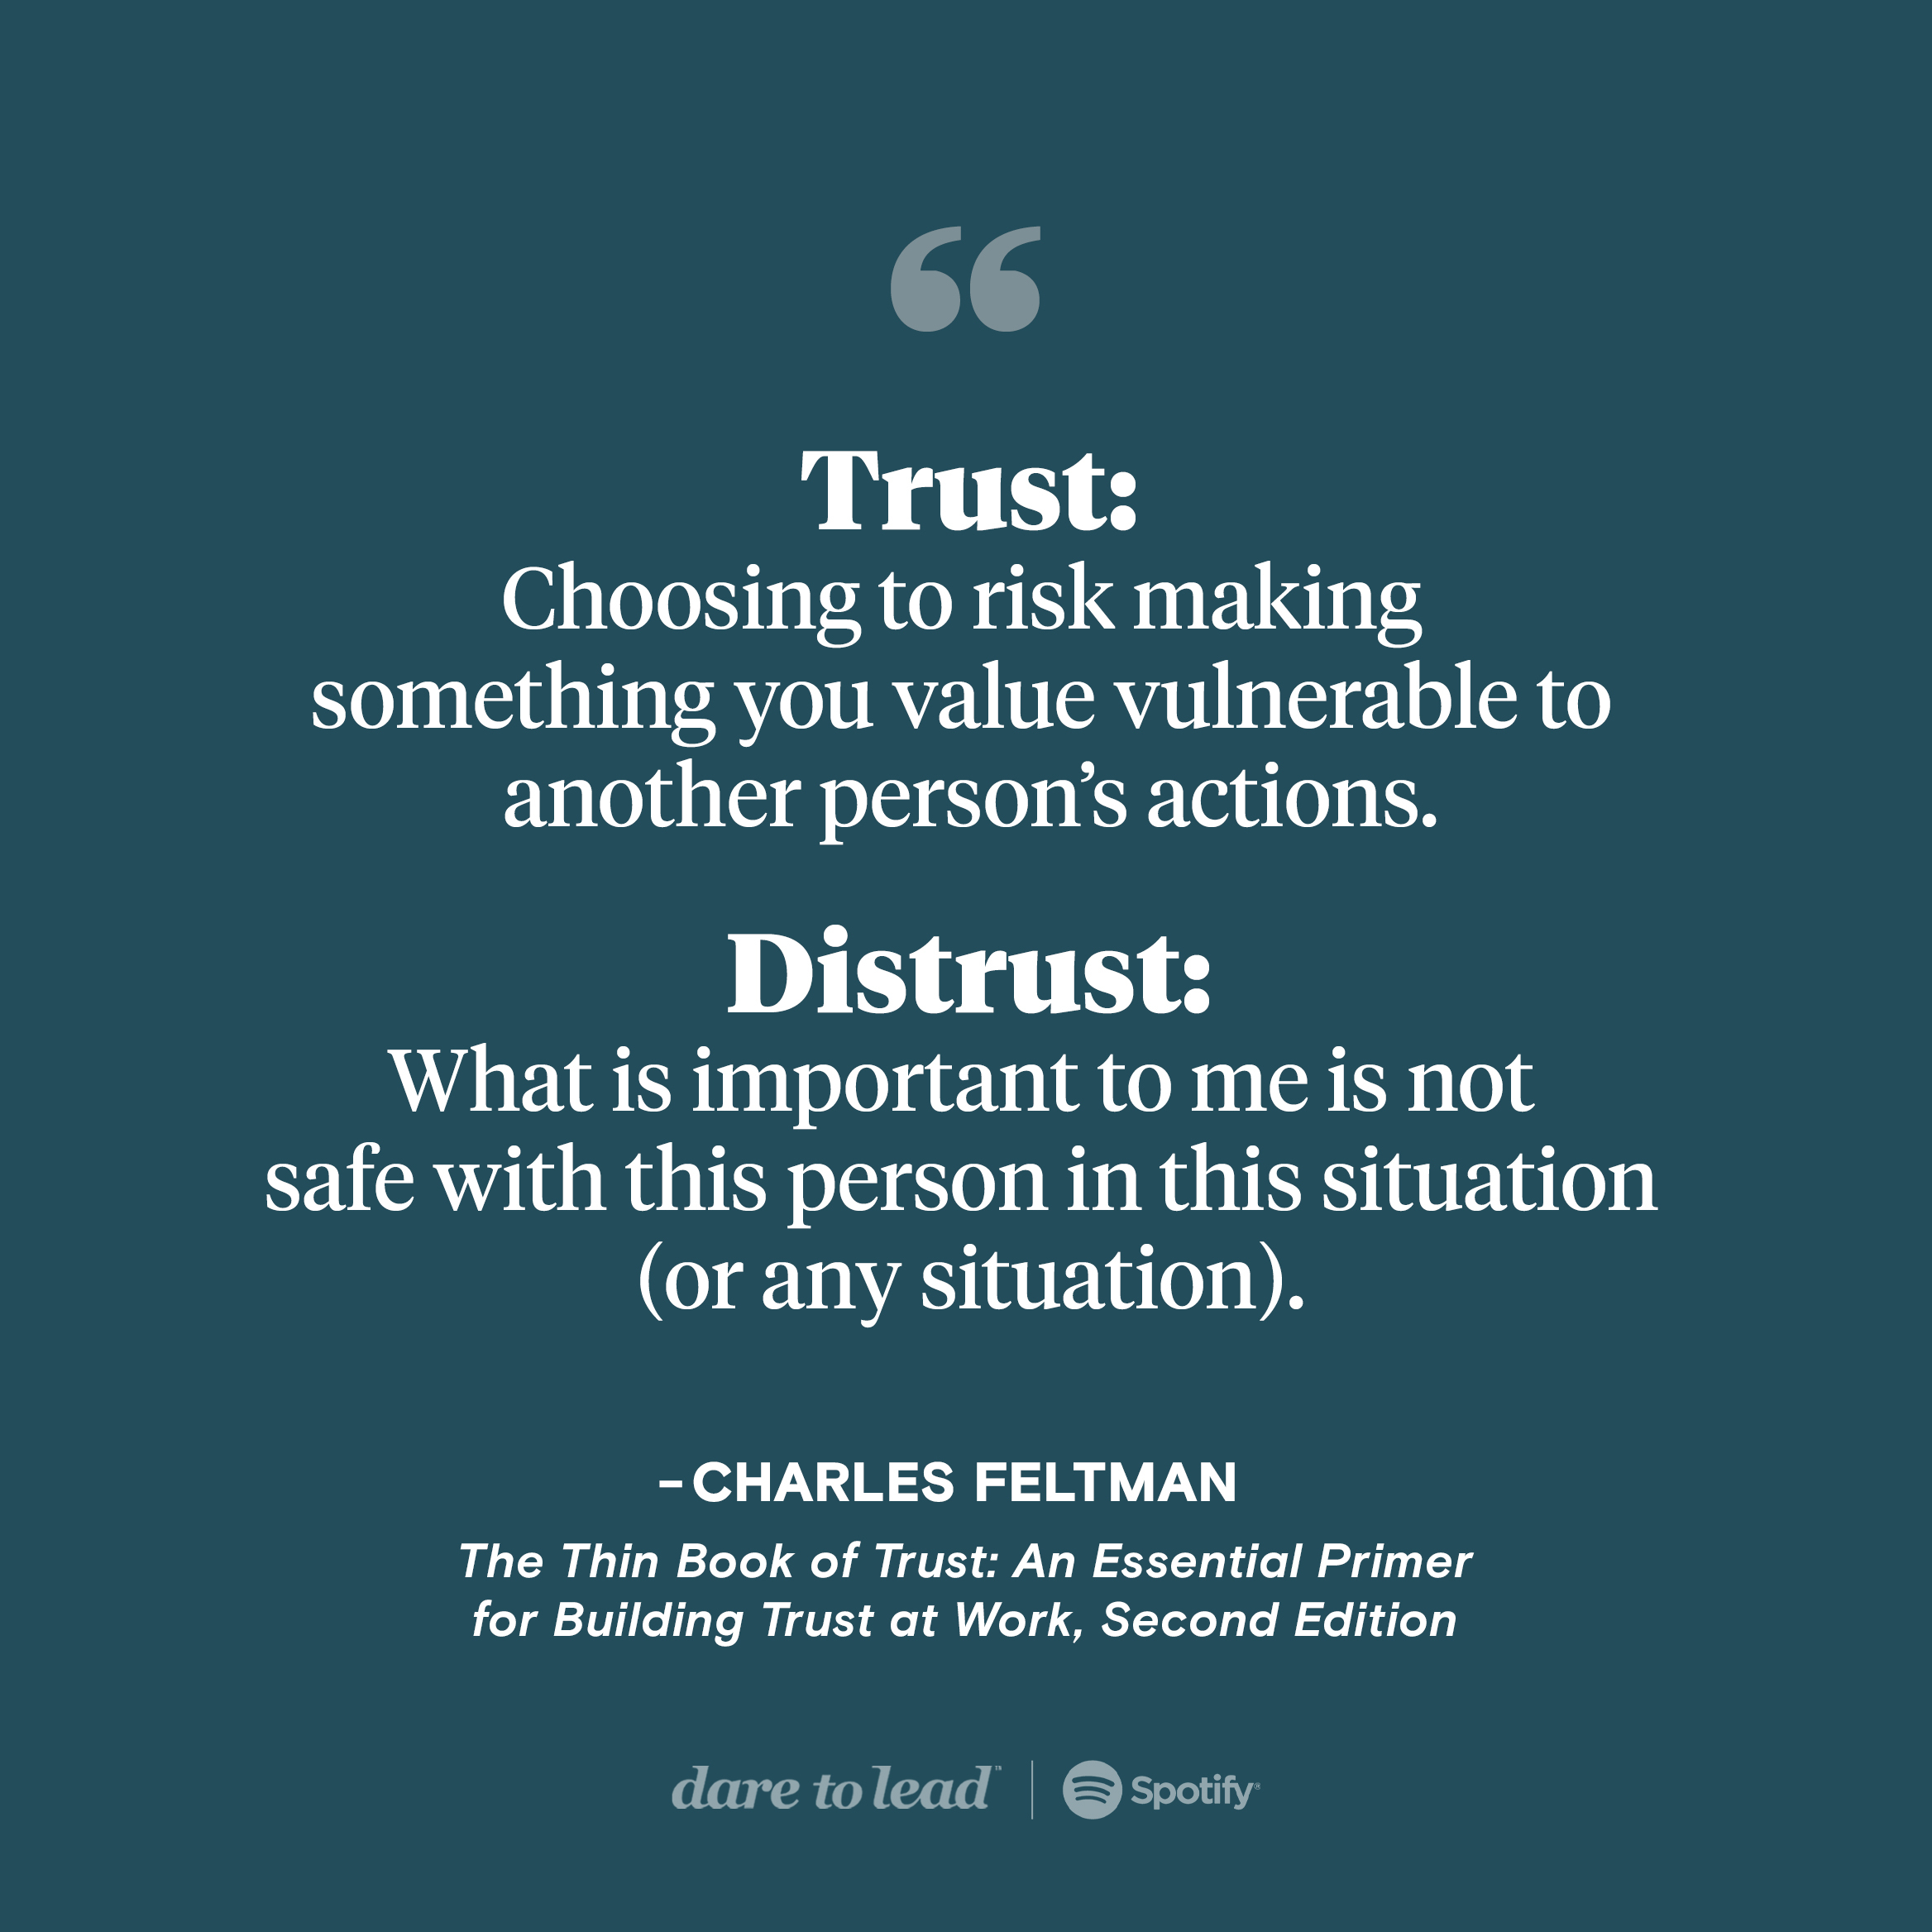 Charles Feltman’s definitions of 'trust' and 'distrust': Trust is 'choosing to risk making something you value vulnerable to another person’s actions.' Distrust occurs when 'what is important to me is not safe with this person in this situation (or any situation).'